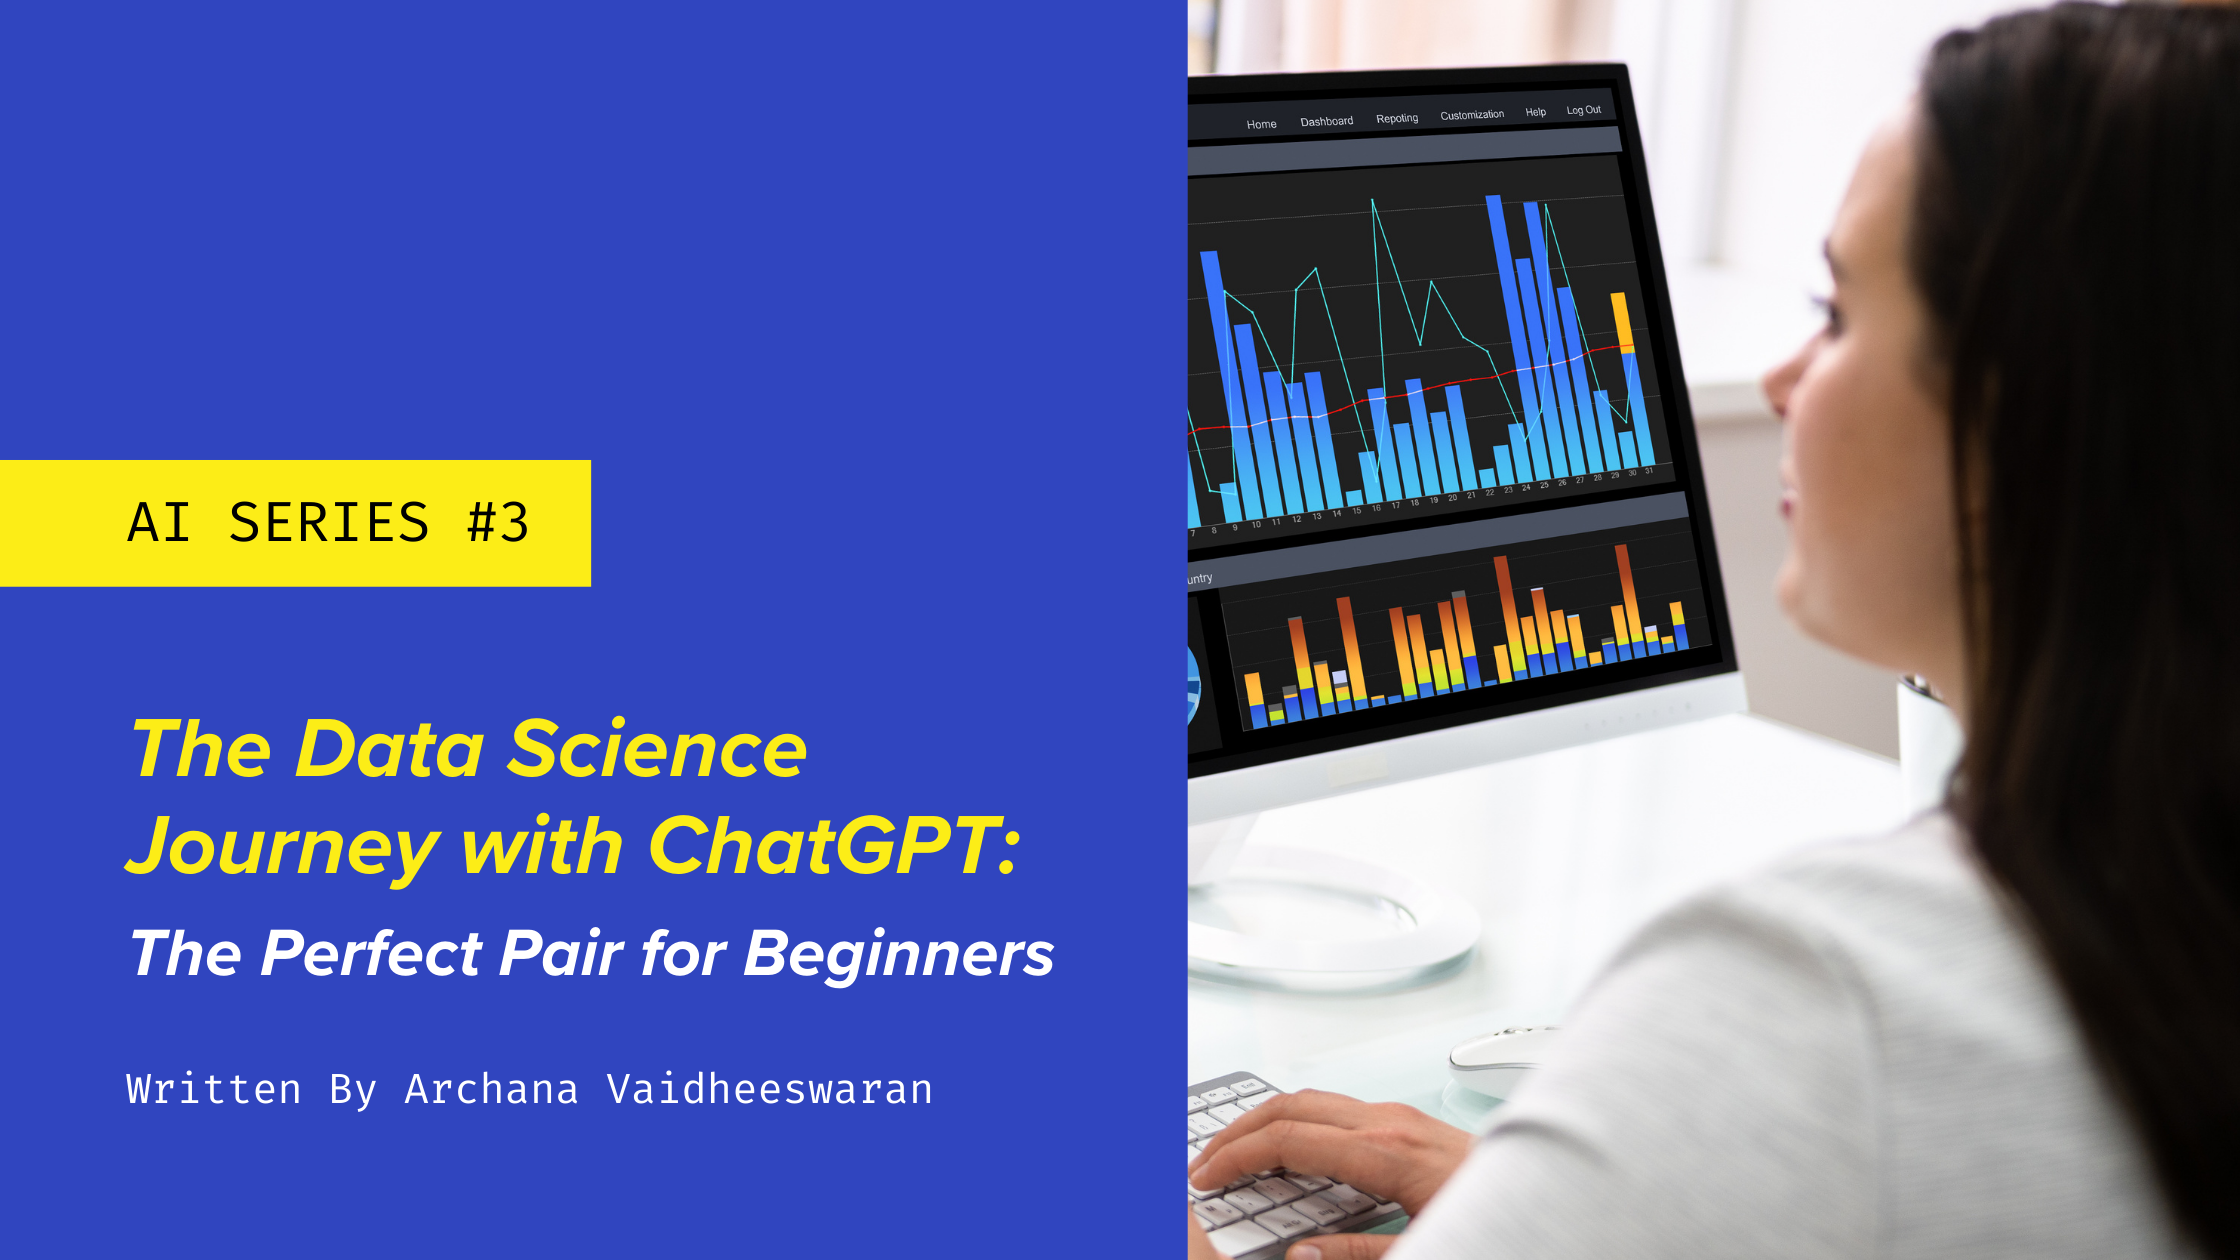 The Data Science Journey with ChatGPT: The Perfect Pair for Beginners